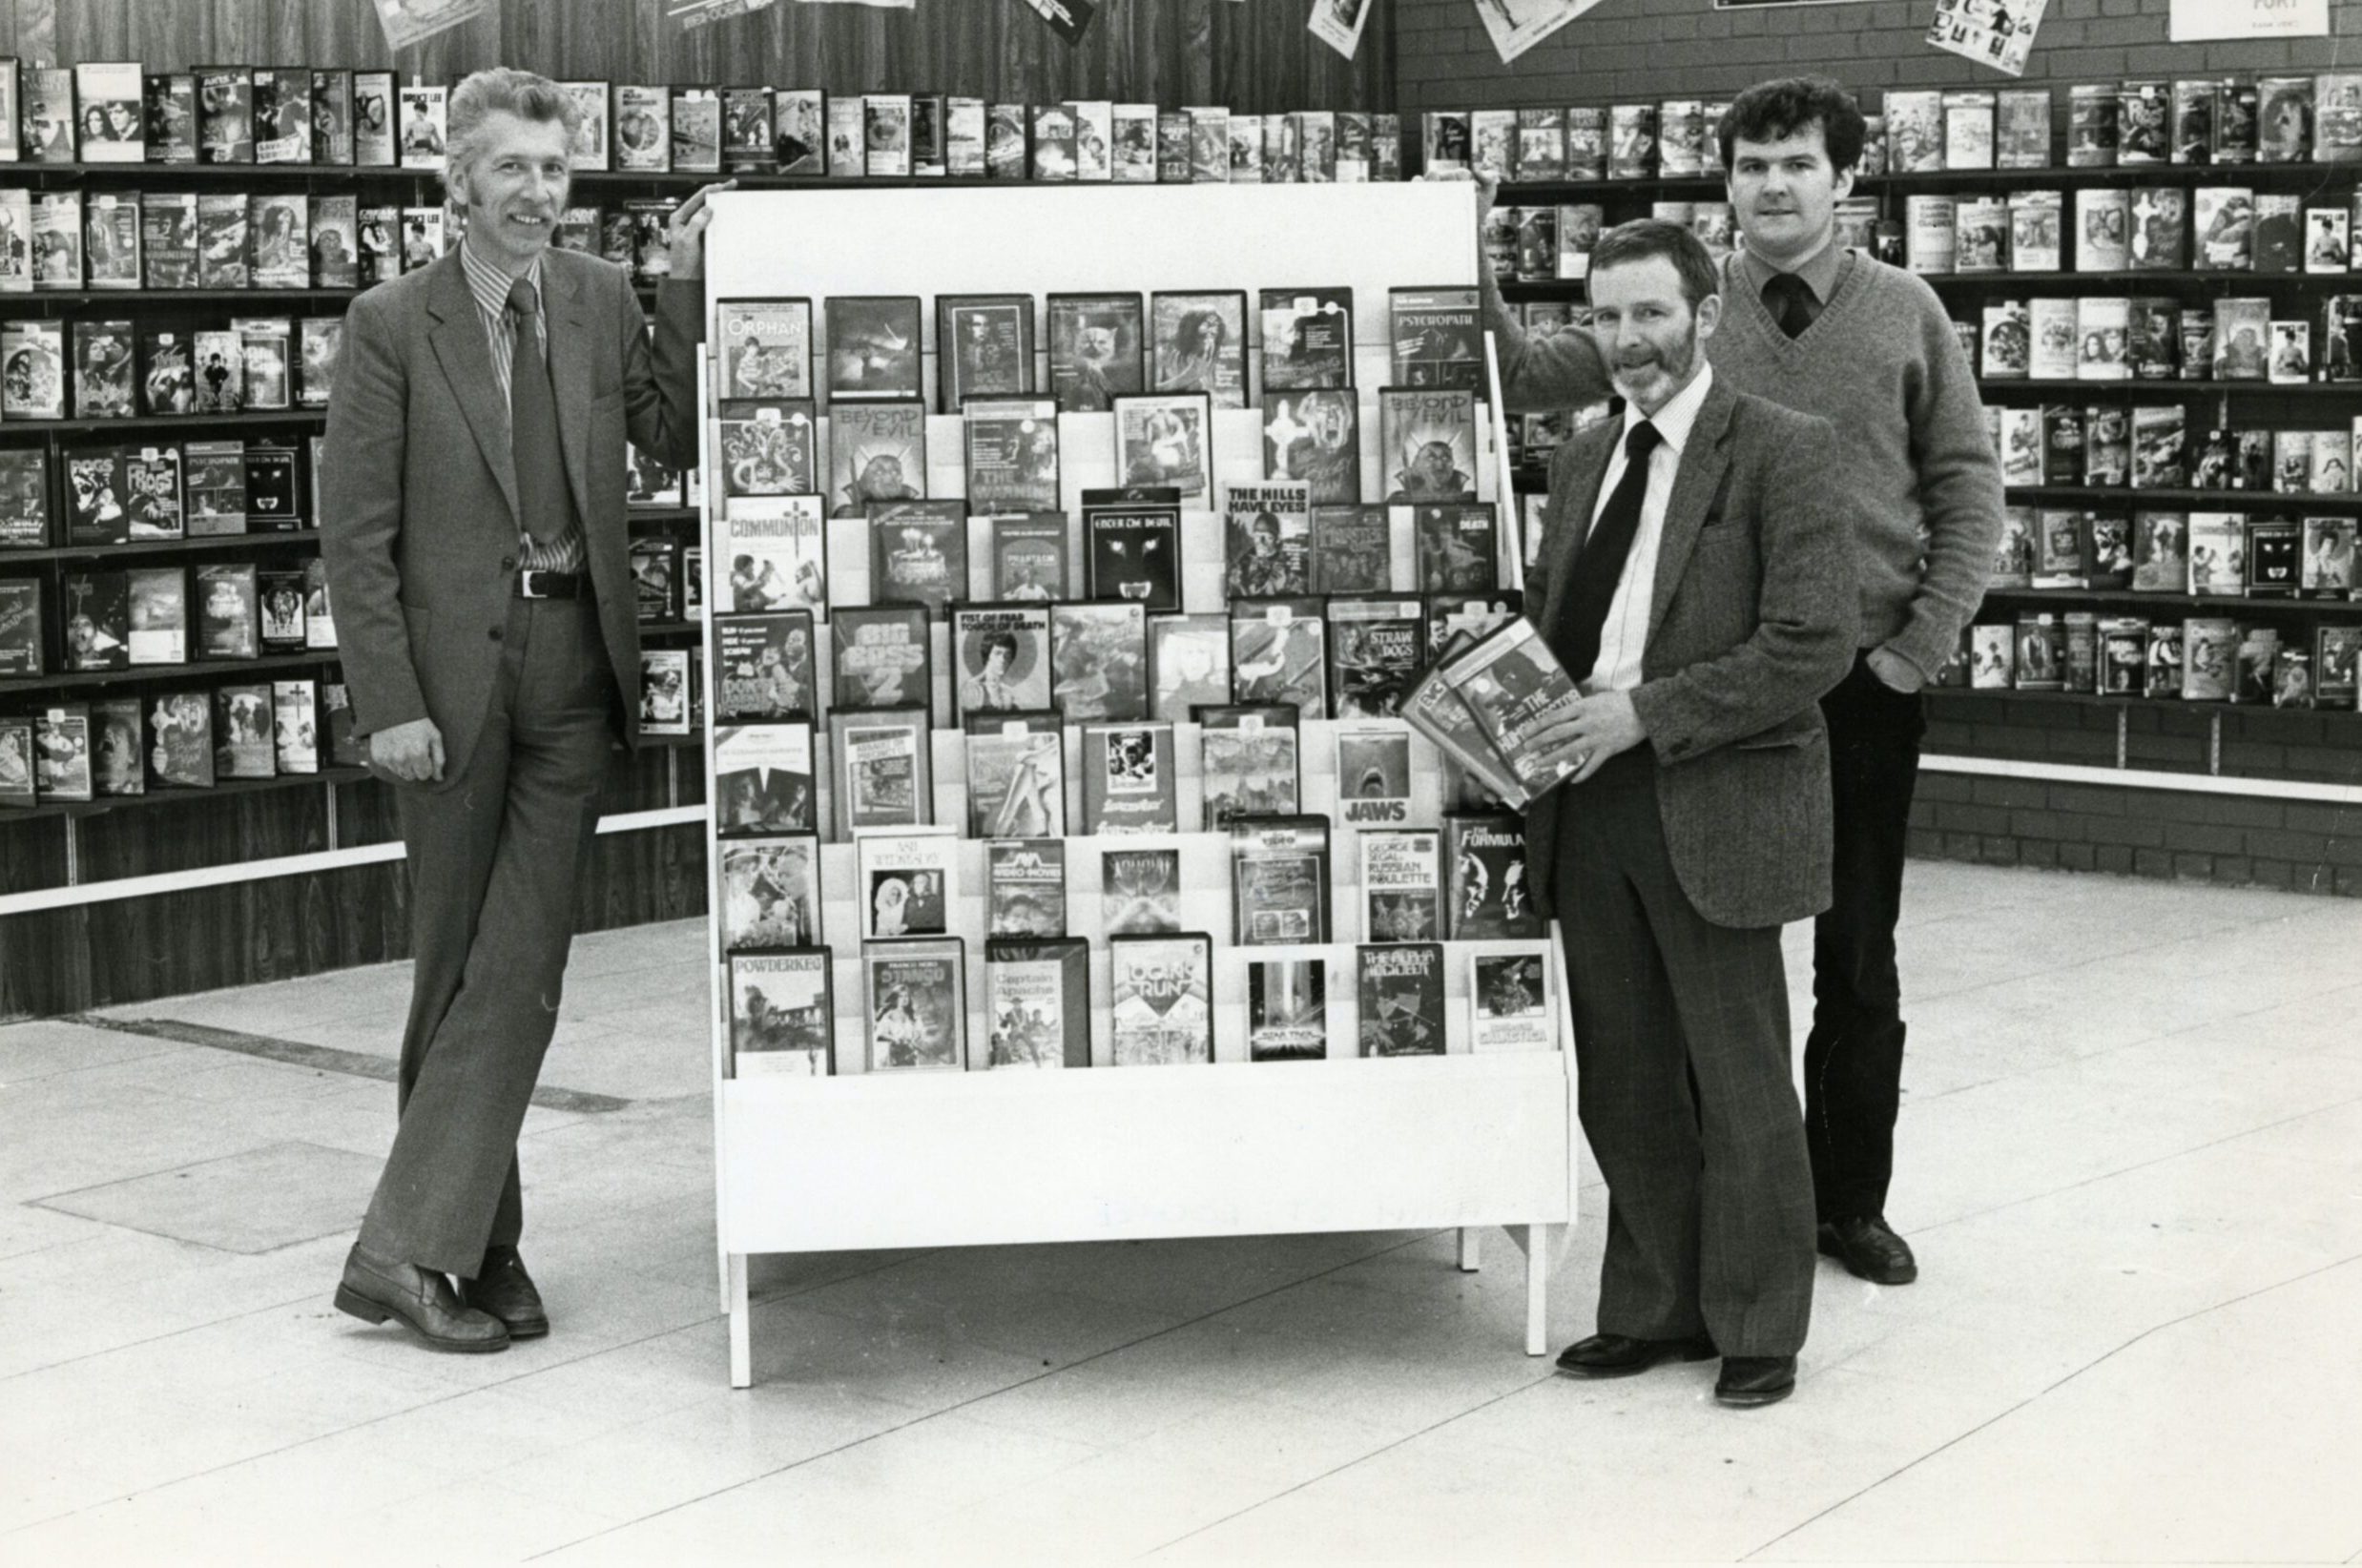 Staff beside some of the videos for hire in Lochee in 1982.